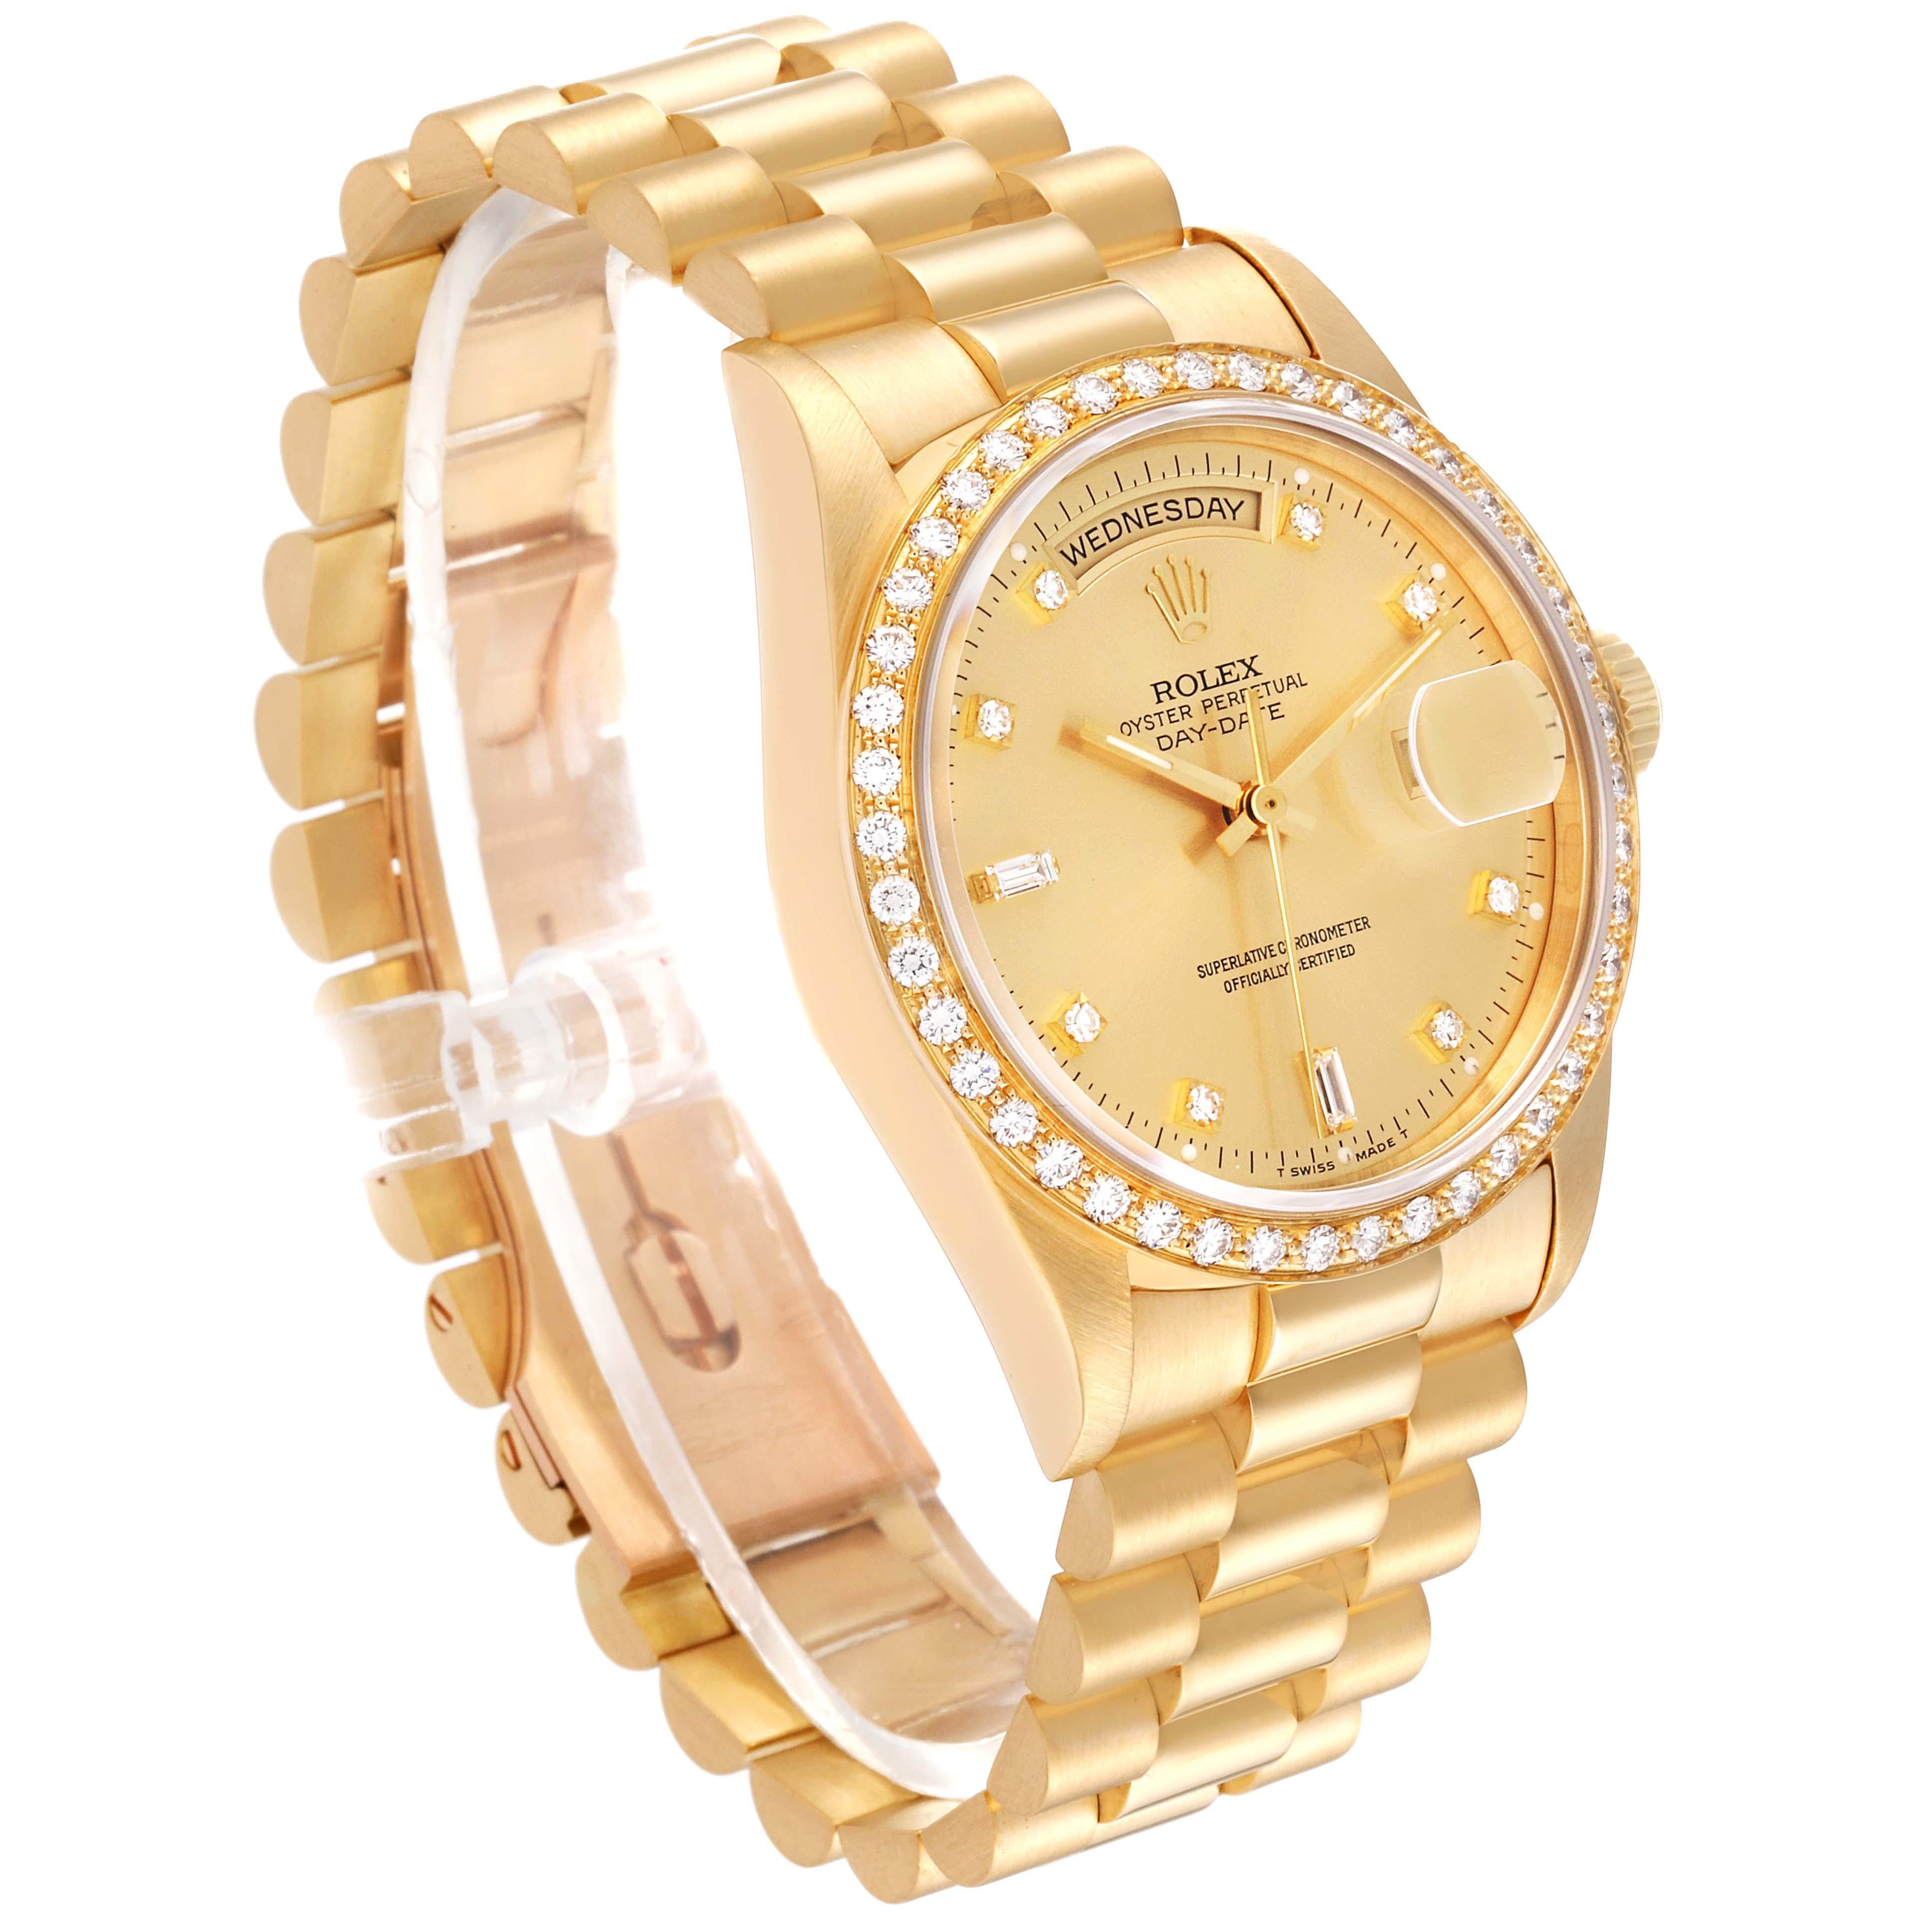 Rolex President Day Date 36mm Yellow Gold Diamond Mens Watch 18348. Officially certified chronometer automatic self-winding movement. 18k yellow gold oyster case 36 mm in diameter. Rolex logo on a crown. Original Rolex factory 18K yellow gold